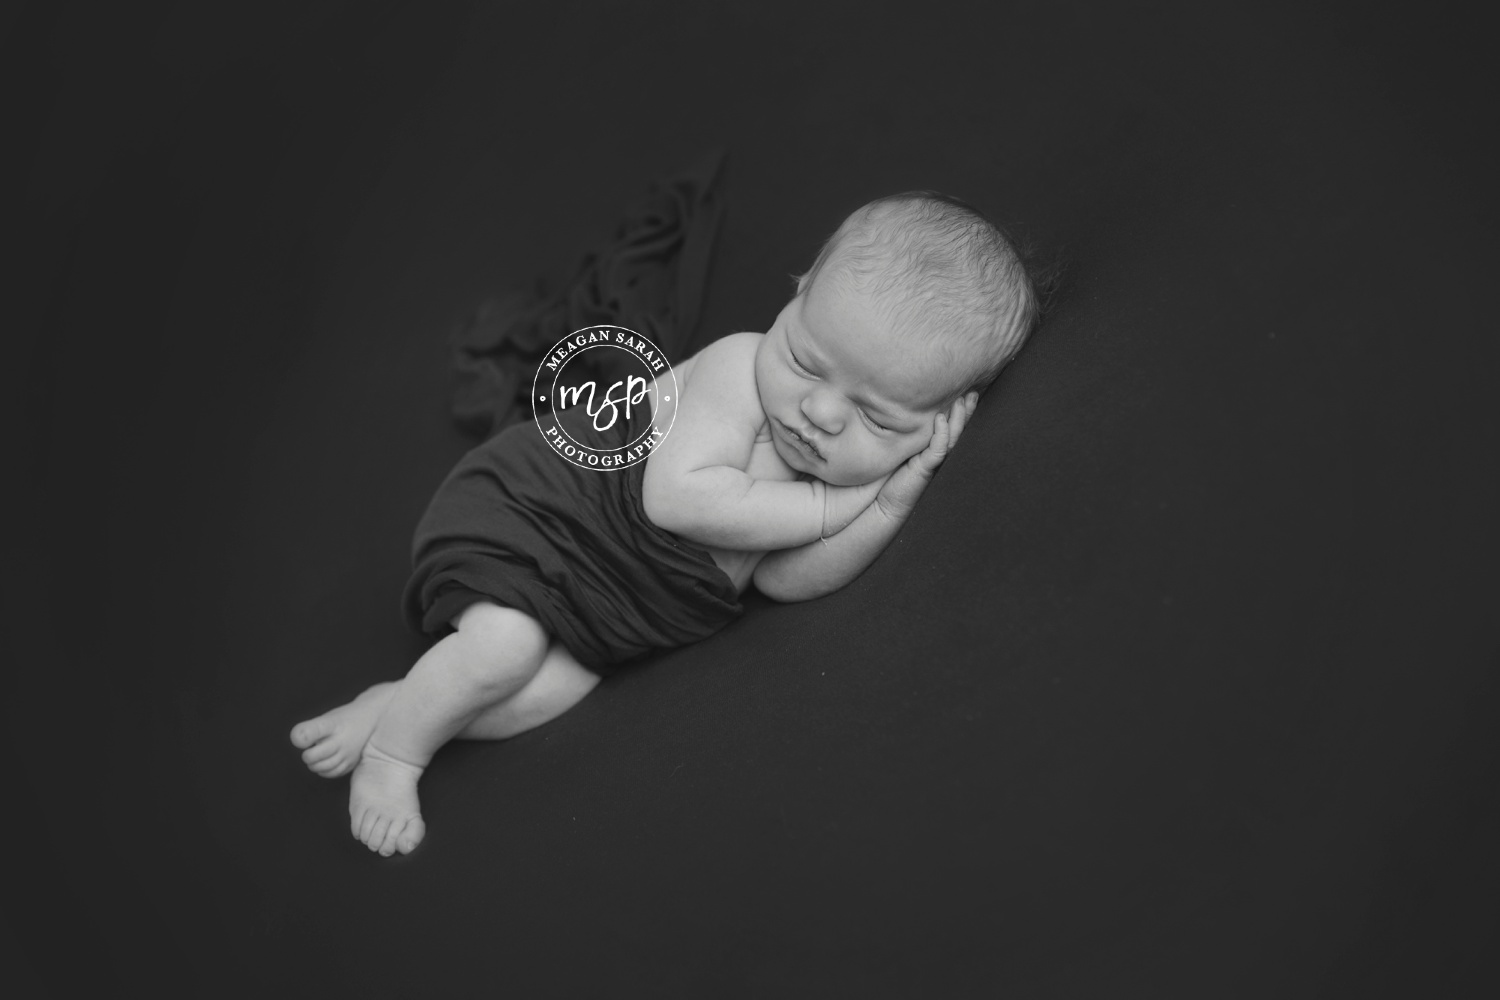 Black and White,PHOTOGRAPHER,Katie Louise Williams,Meagan Sarah Pope,West Yorkshire Photographer,Professional Photographer in Leeds,Meagan Sarah Photography,Leeds Photographer,Horsforth Photographer,Horsforth Leeds Photographer,Sex of Baby,Girl,Horsforth Newborn Photography,Leeds Baby Photographer,Leeds Newborn Photographer,Newborn Babies,Newborn Photographer,Newborn Photography,Photos of Babies,Photos of Newborns,Yorkshire Newborn Photographer,Yorkshire Newborn Photography,